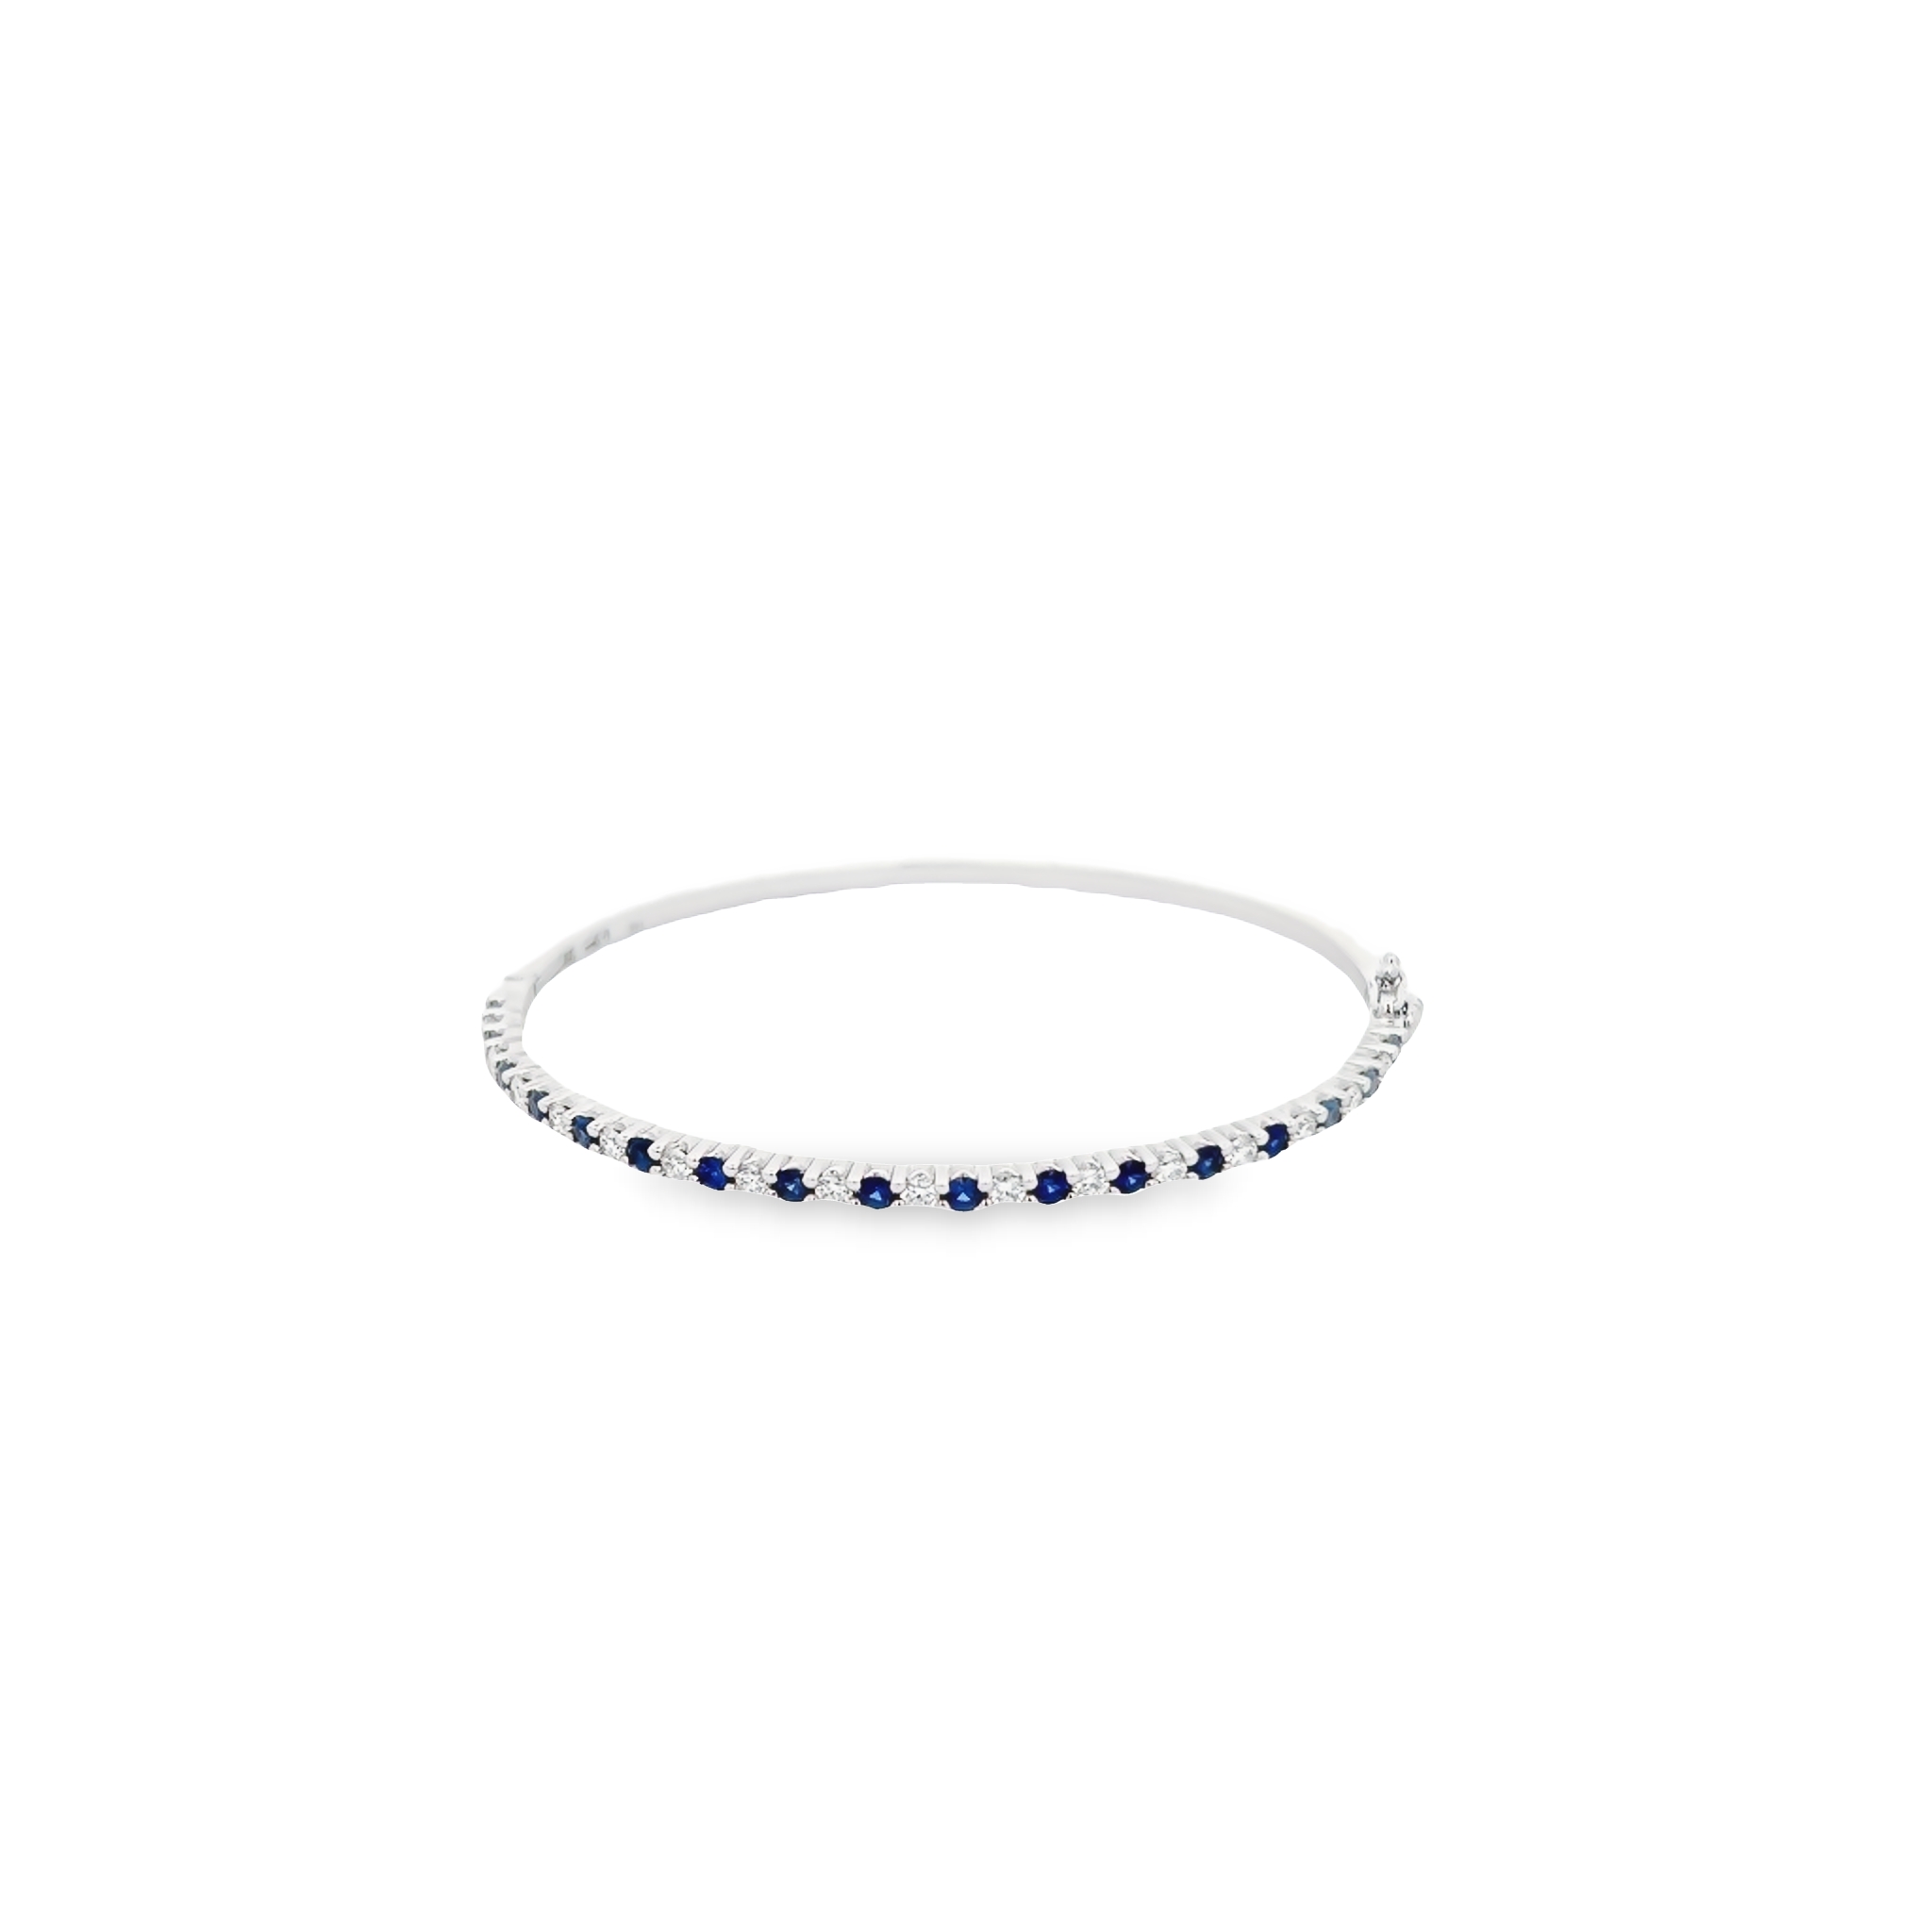 14 Karat White Gold Hinged Bangle Bracelet With 16=0.80 Total Weight Round Brilliant G Vs Diamonds And 17=1.06 Total Weight Round Mixed Cut Sapphires